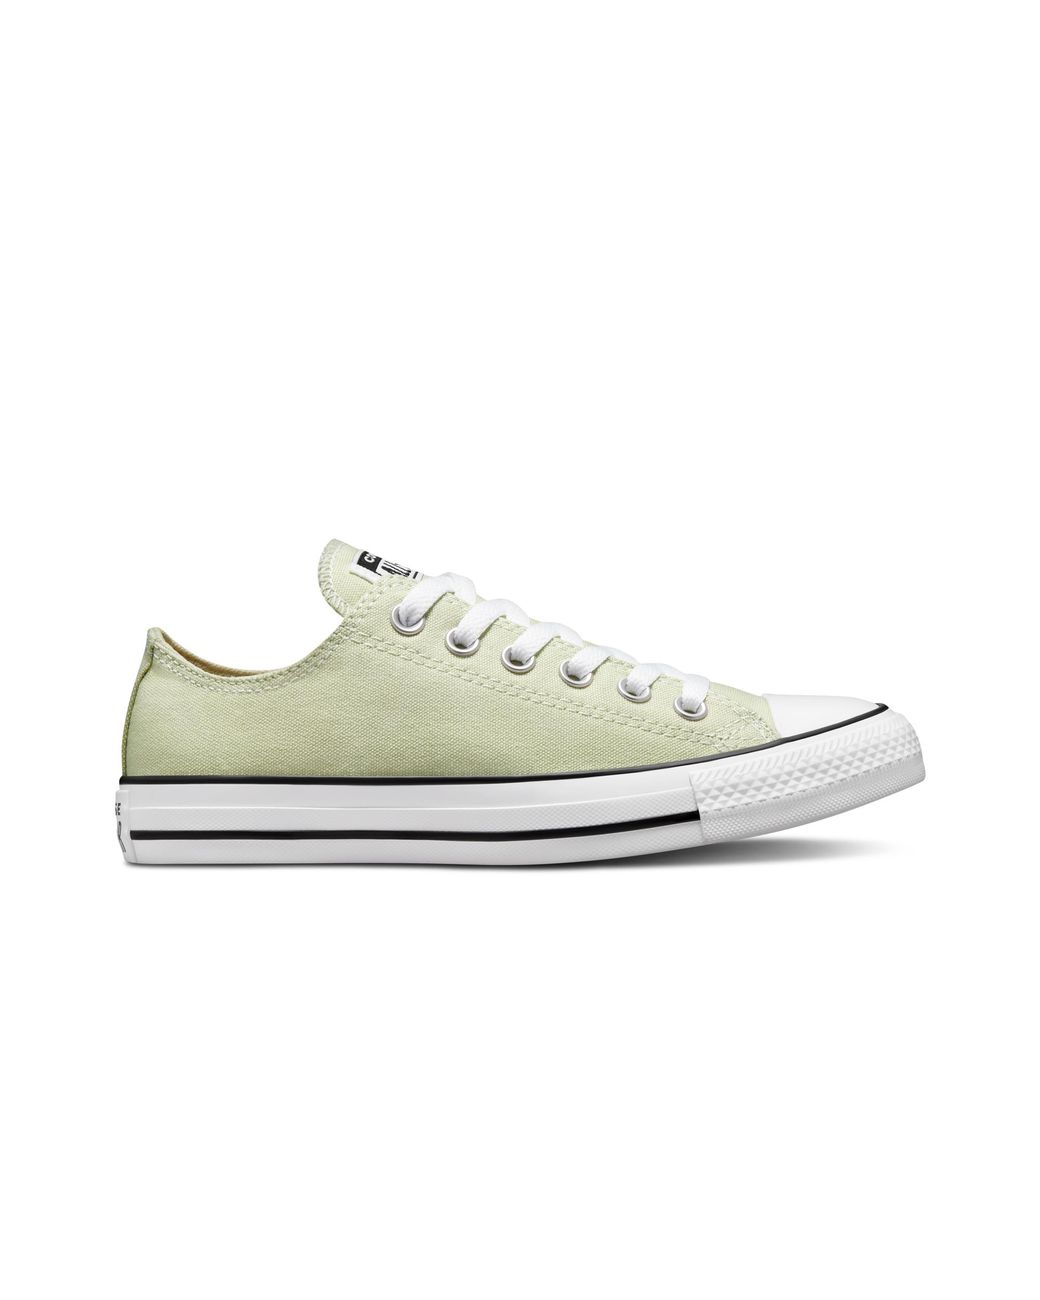 Converse Chuck Taylor All Star Seasonal Color in White | Lyst